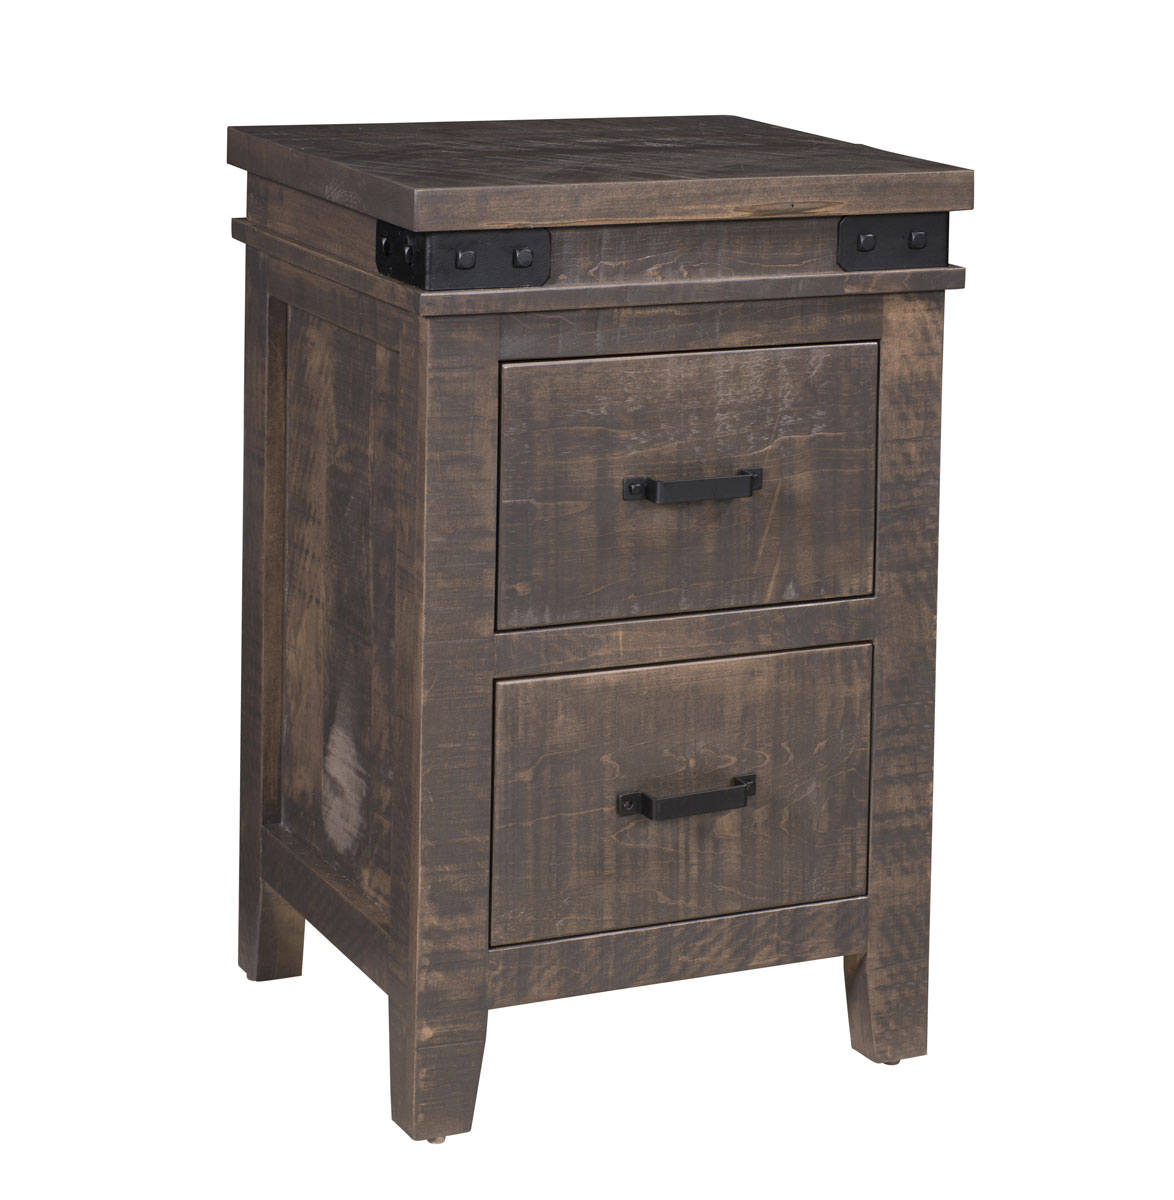 Coalbrooke 2-Drawer Nightstand shown in brown maple with a weathered char finish.